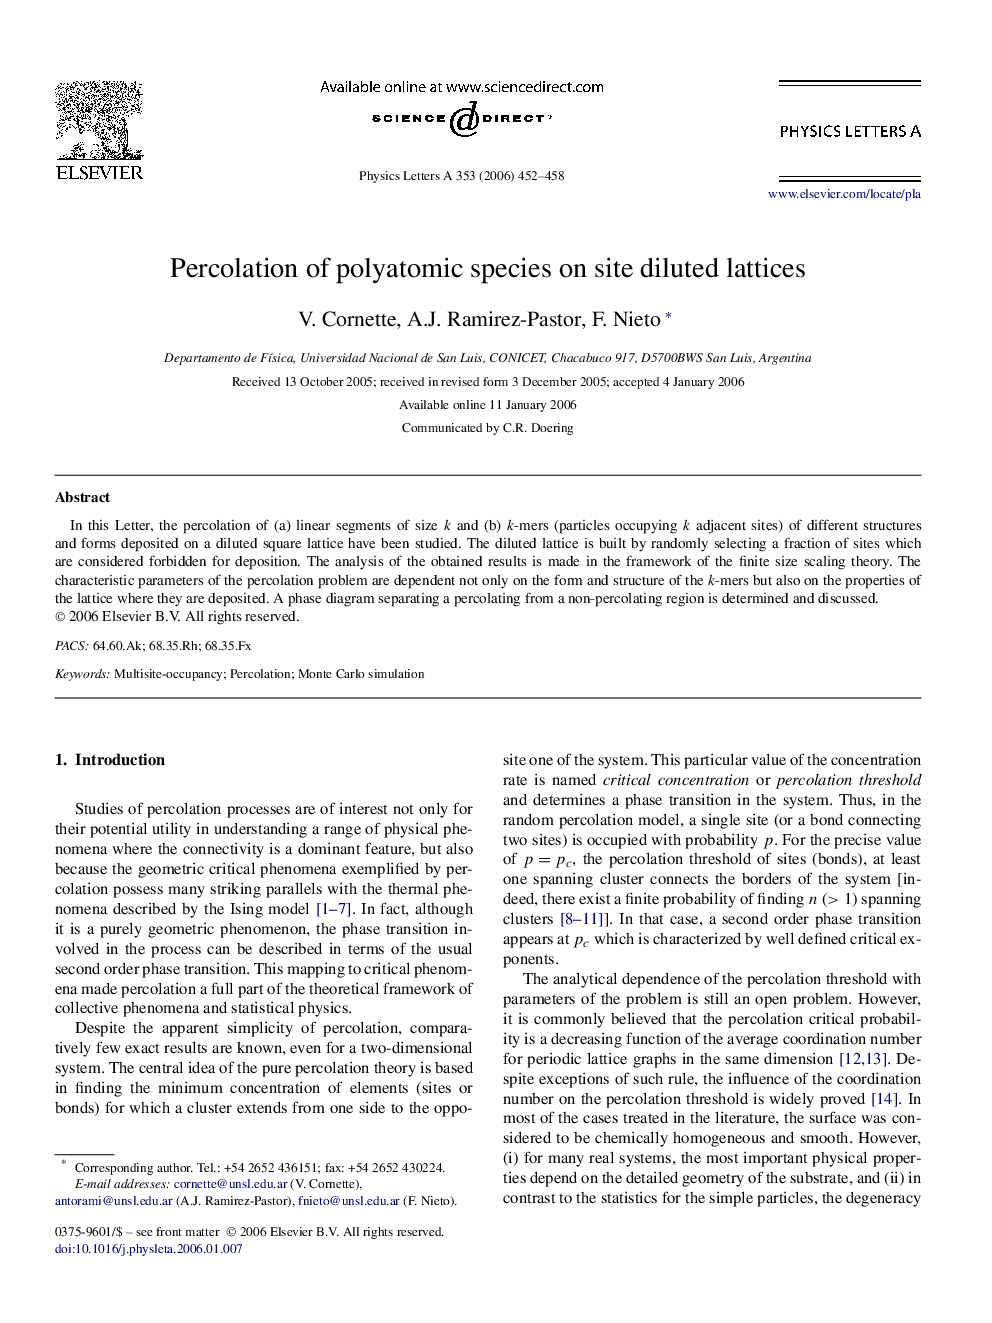 Percolation of polyatomic species on site diluted lattices